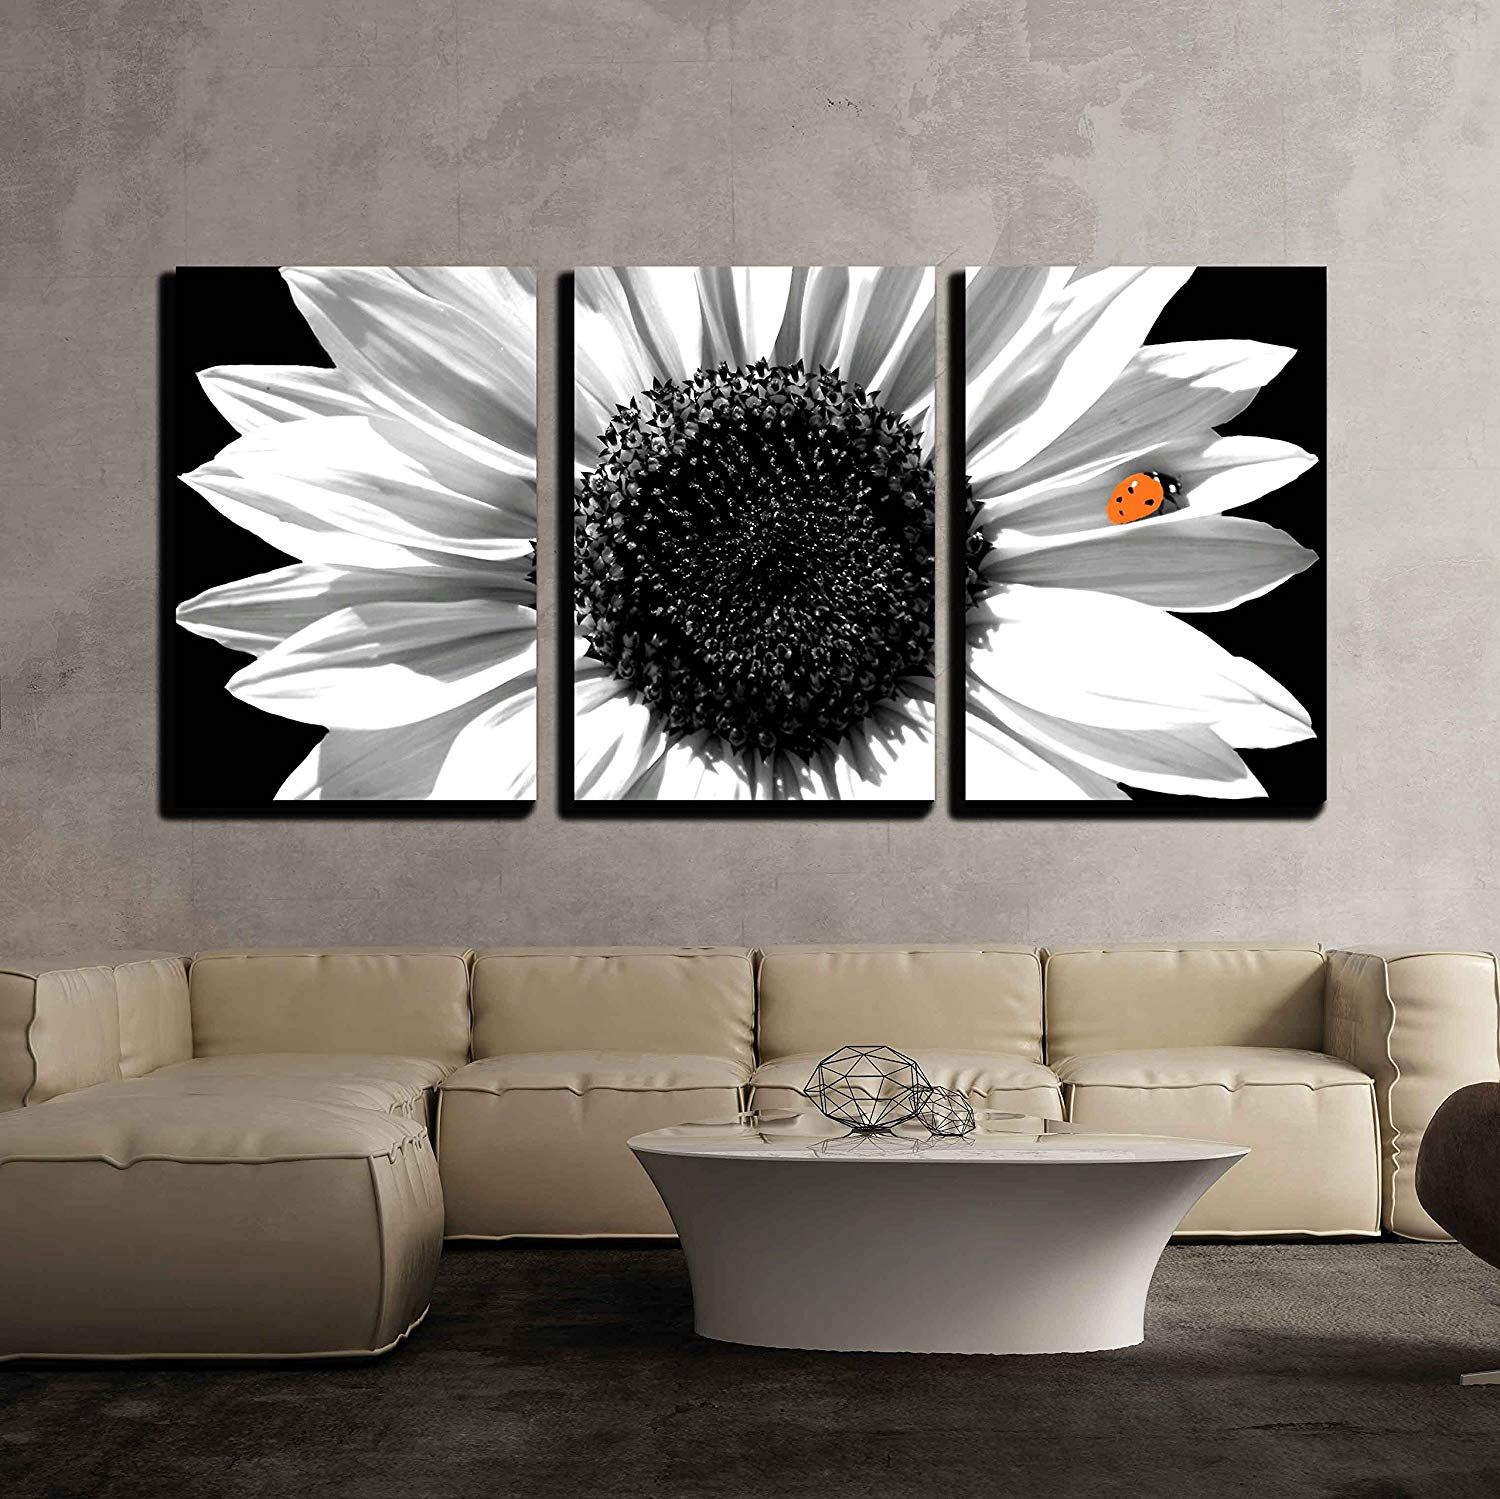 Wall26 – 3 Piece Canvas Wall Art – Sunflower In Black And White With With Regard To Sunflower Metal Framed Wall Art (View 6 of 15)